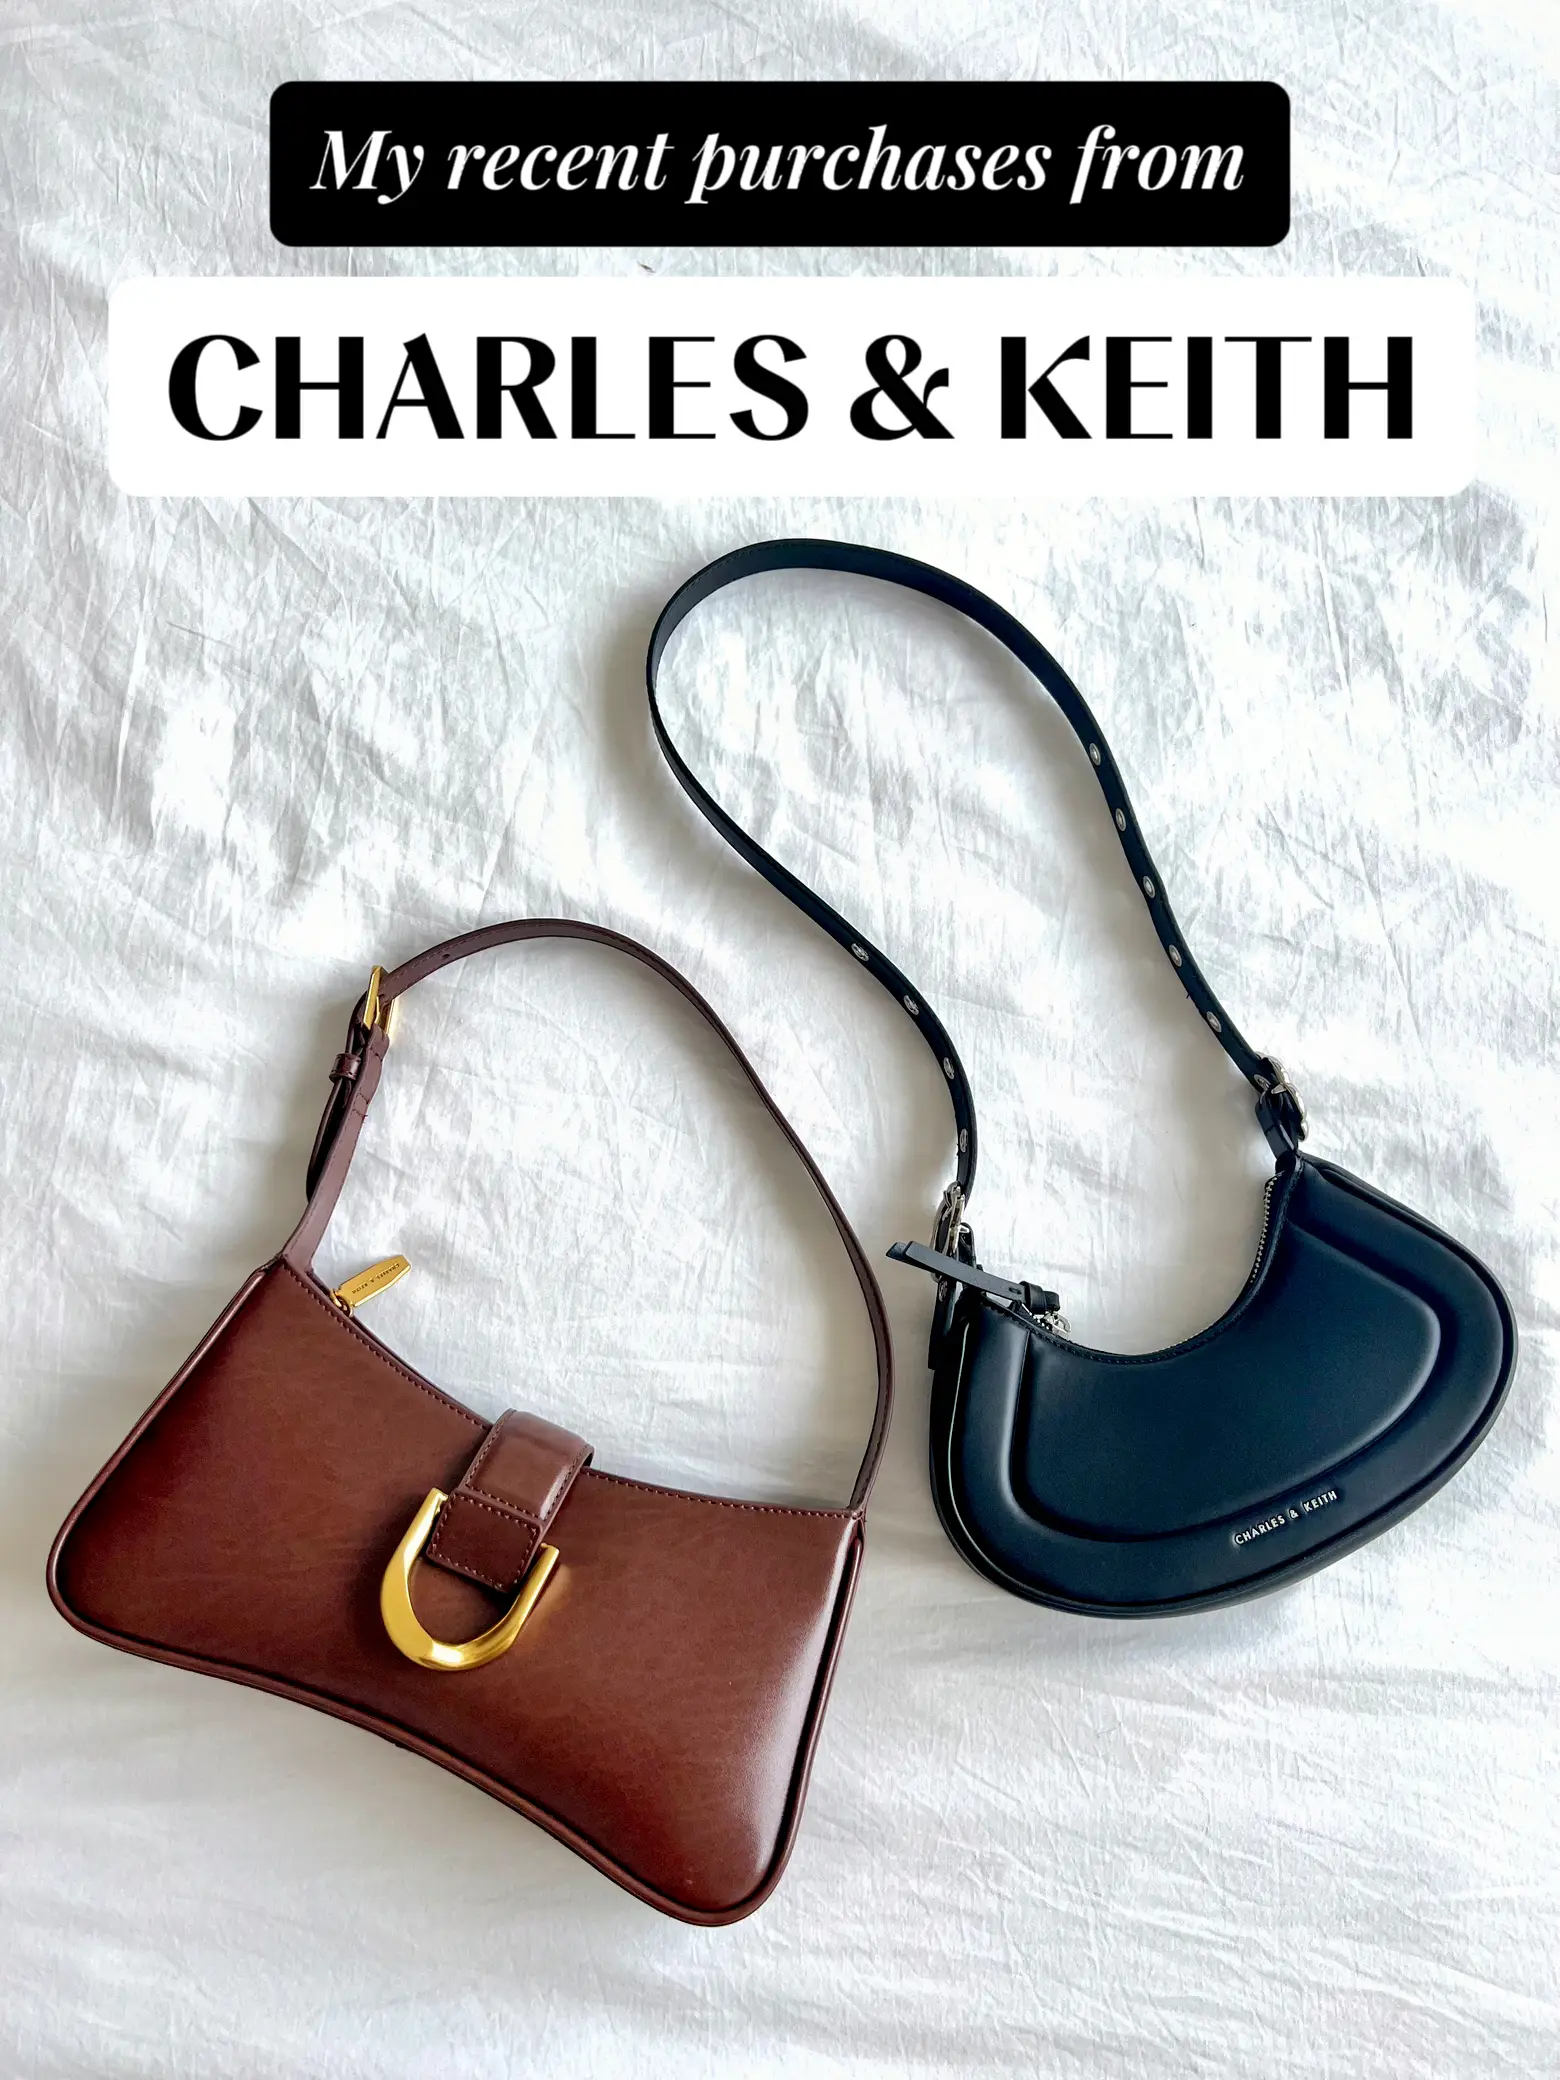 CHARLES & KEITH (@charleskeithofficial) • Instagram photos and videos